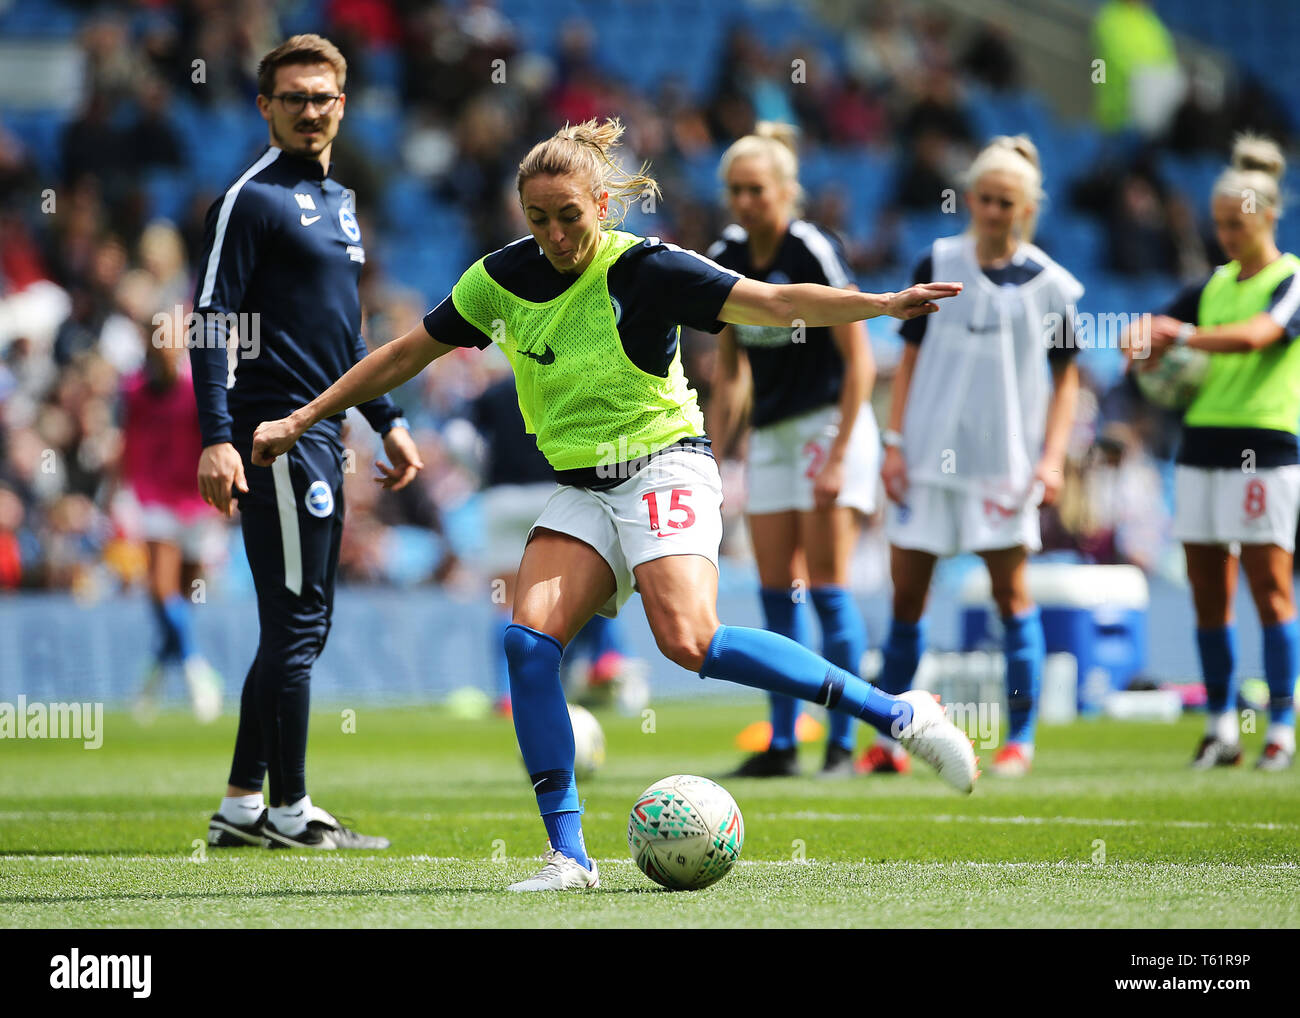 Brighton's Kayleigh Green warms up before kick off during the FA Women's Super League match at the AMEX Stadium, Brighton. Stock Photo